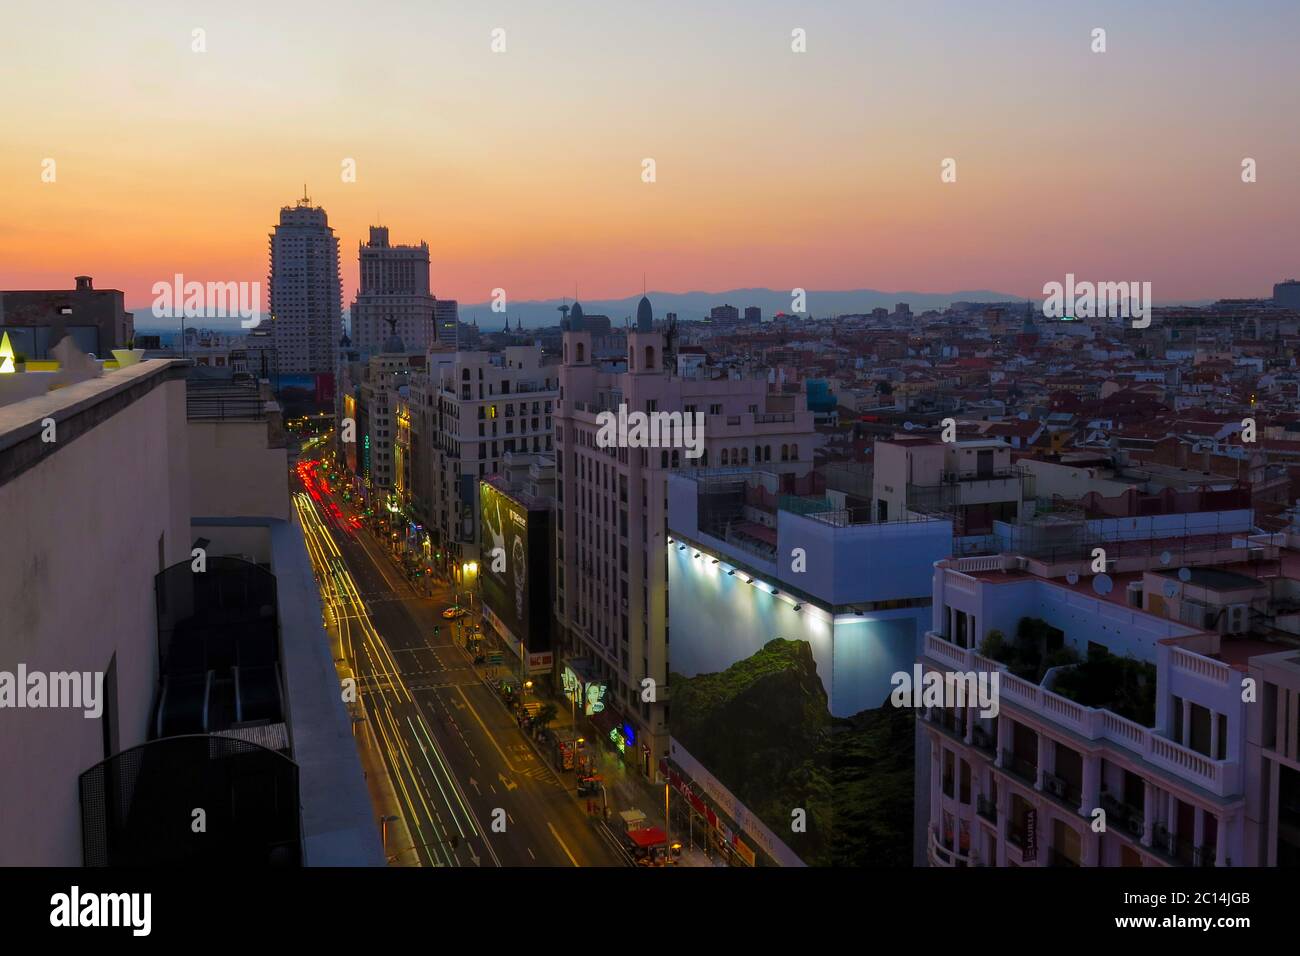 Elevated view of Gran Via, Madrid, Spain at sunset Stock Photo